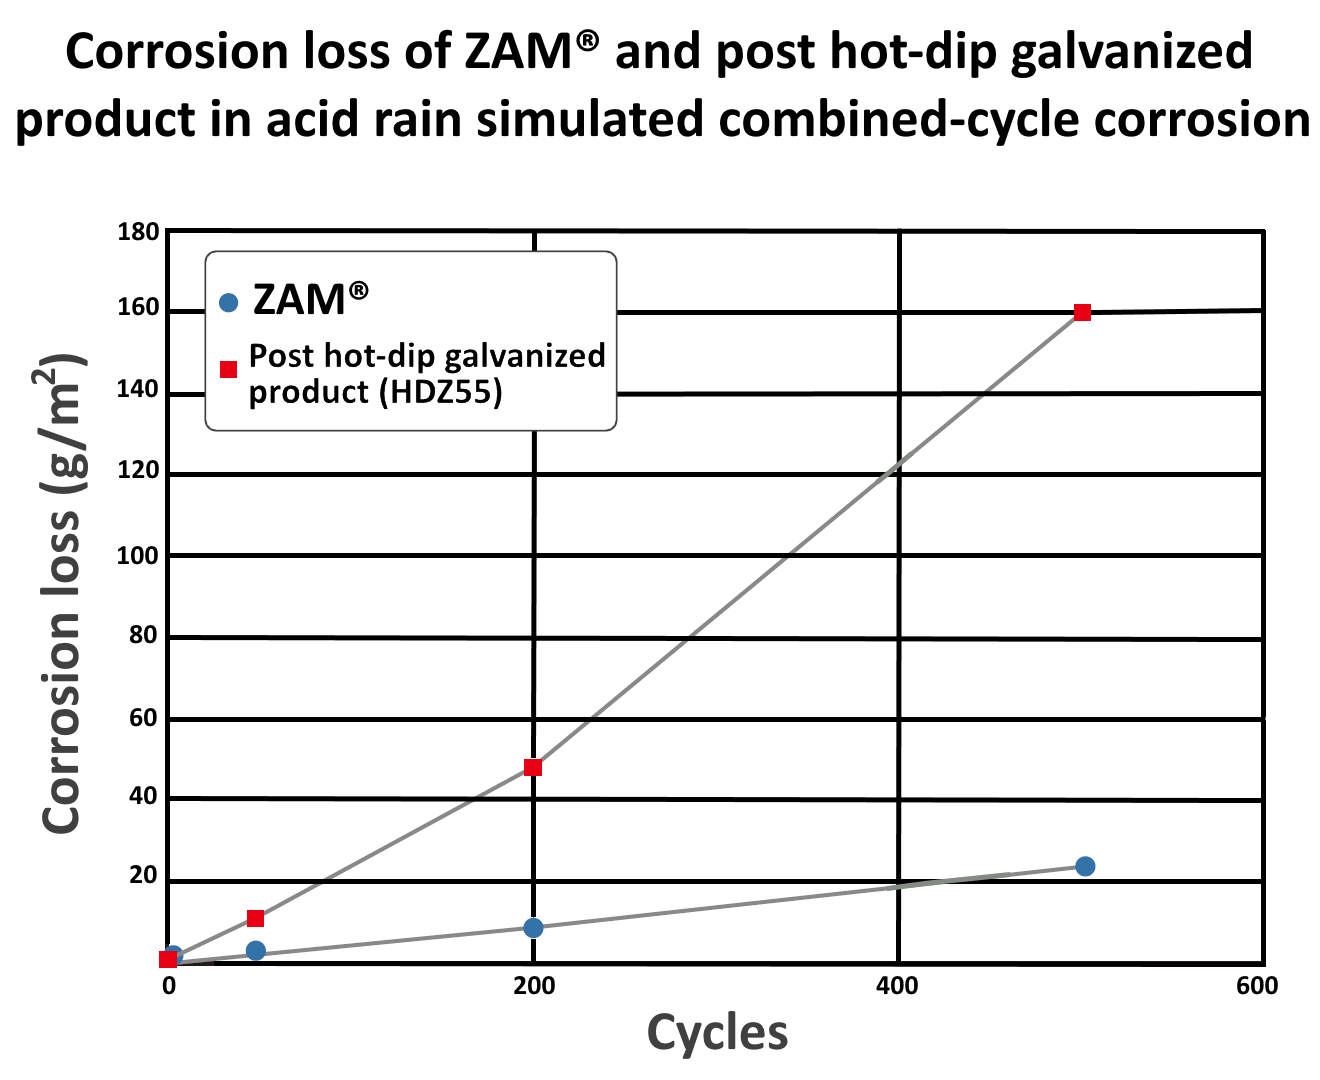 Graph showing corrosion loss of ZAM and post hot-dip galvanized product in acid rain test